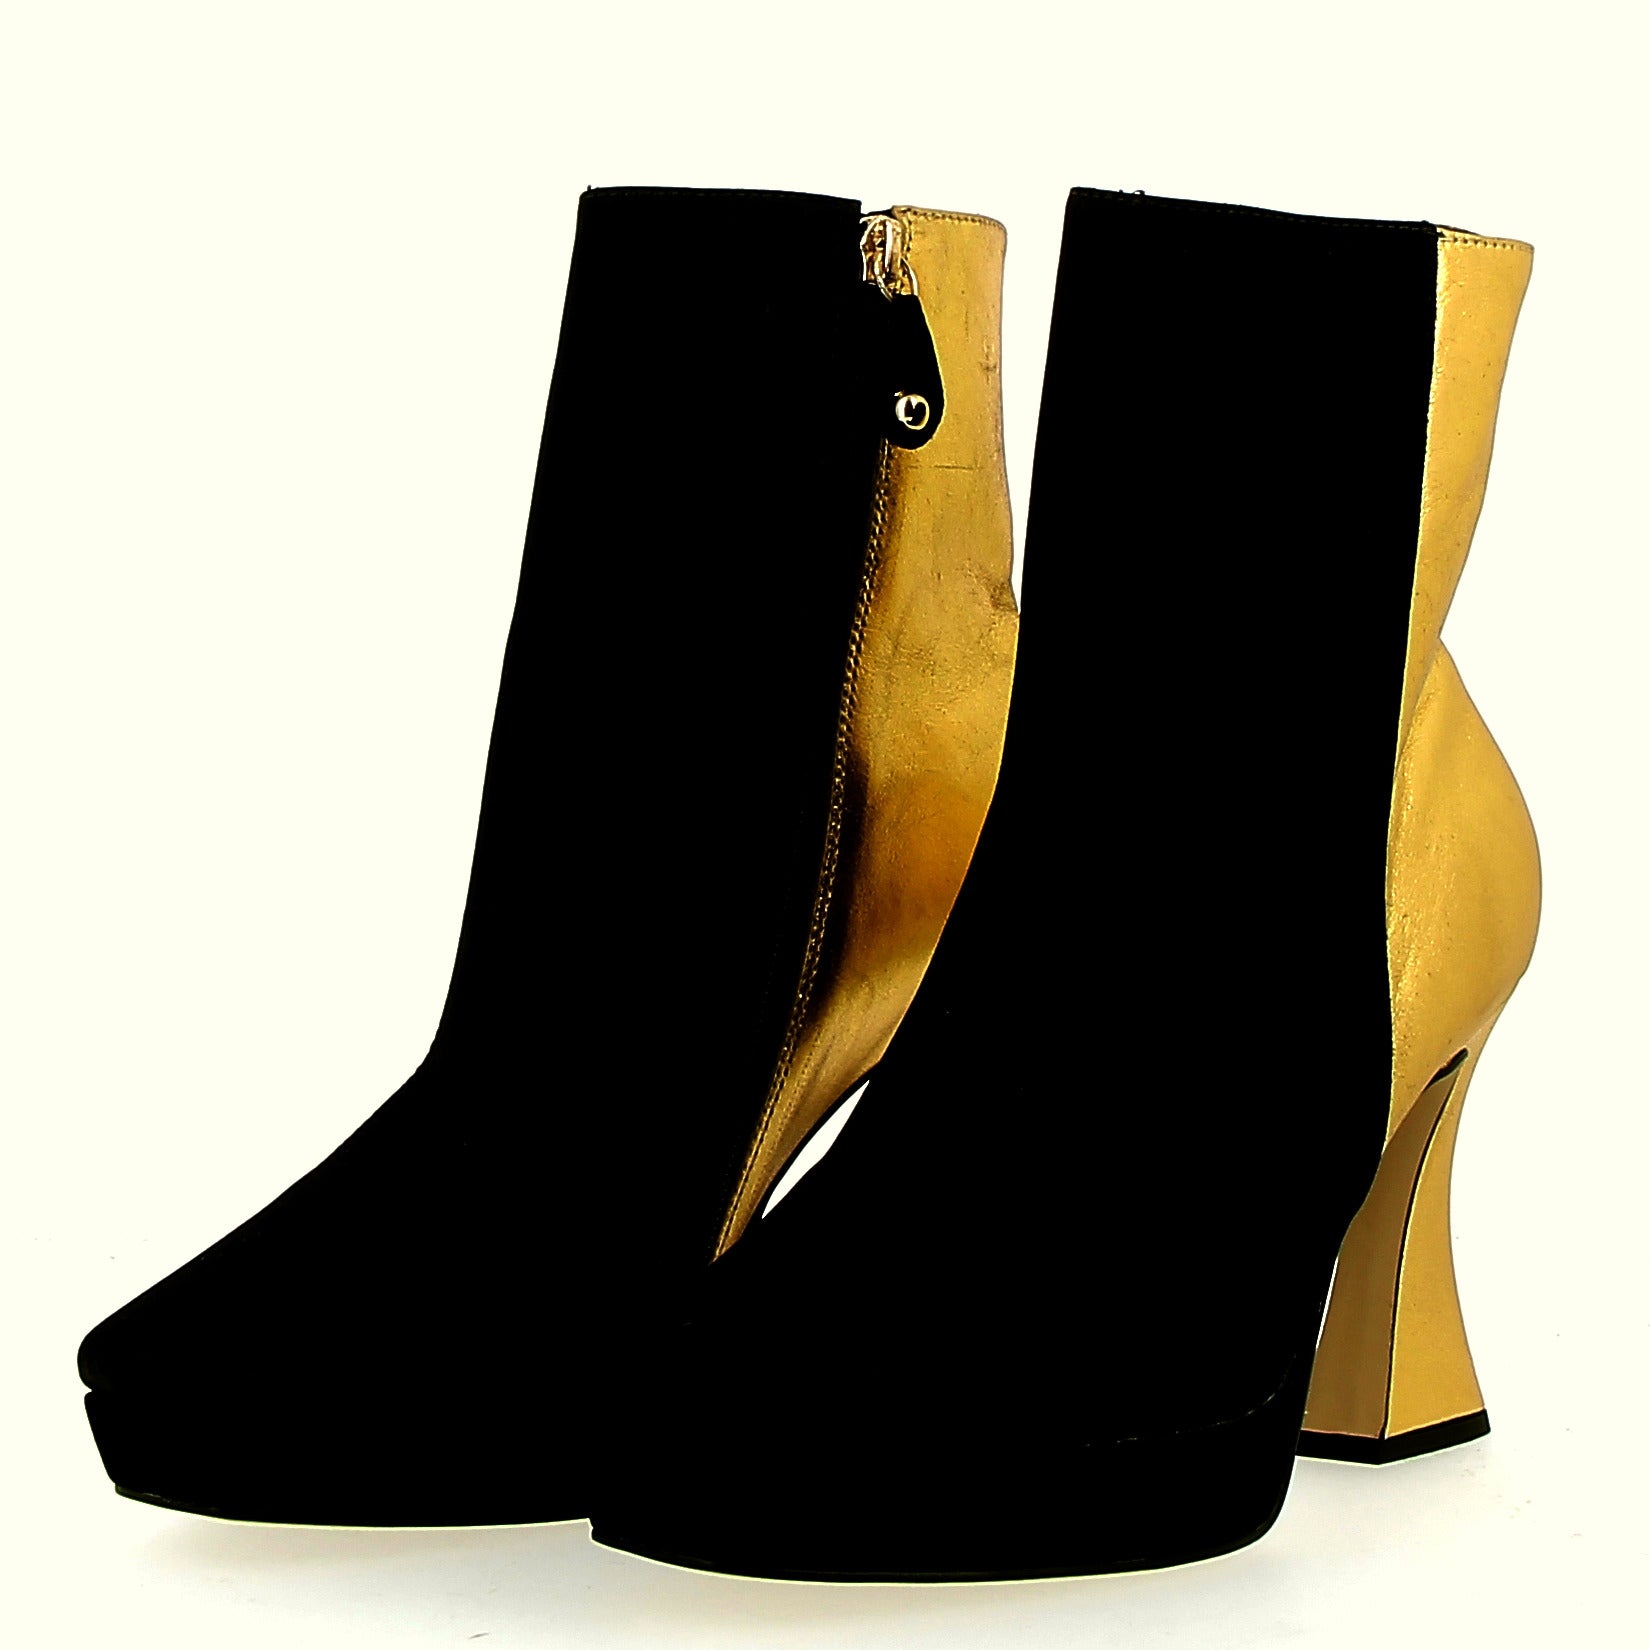 Ankle boot gold and black hourglass heel